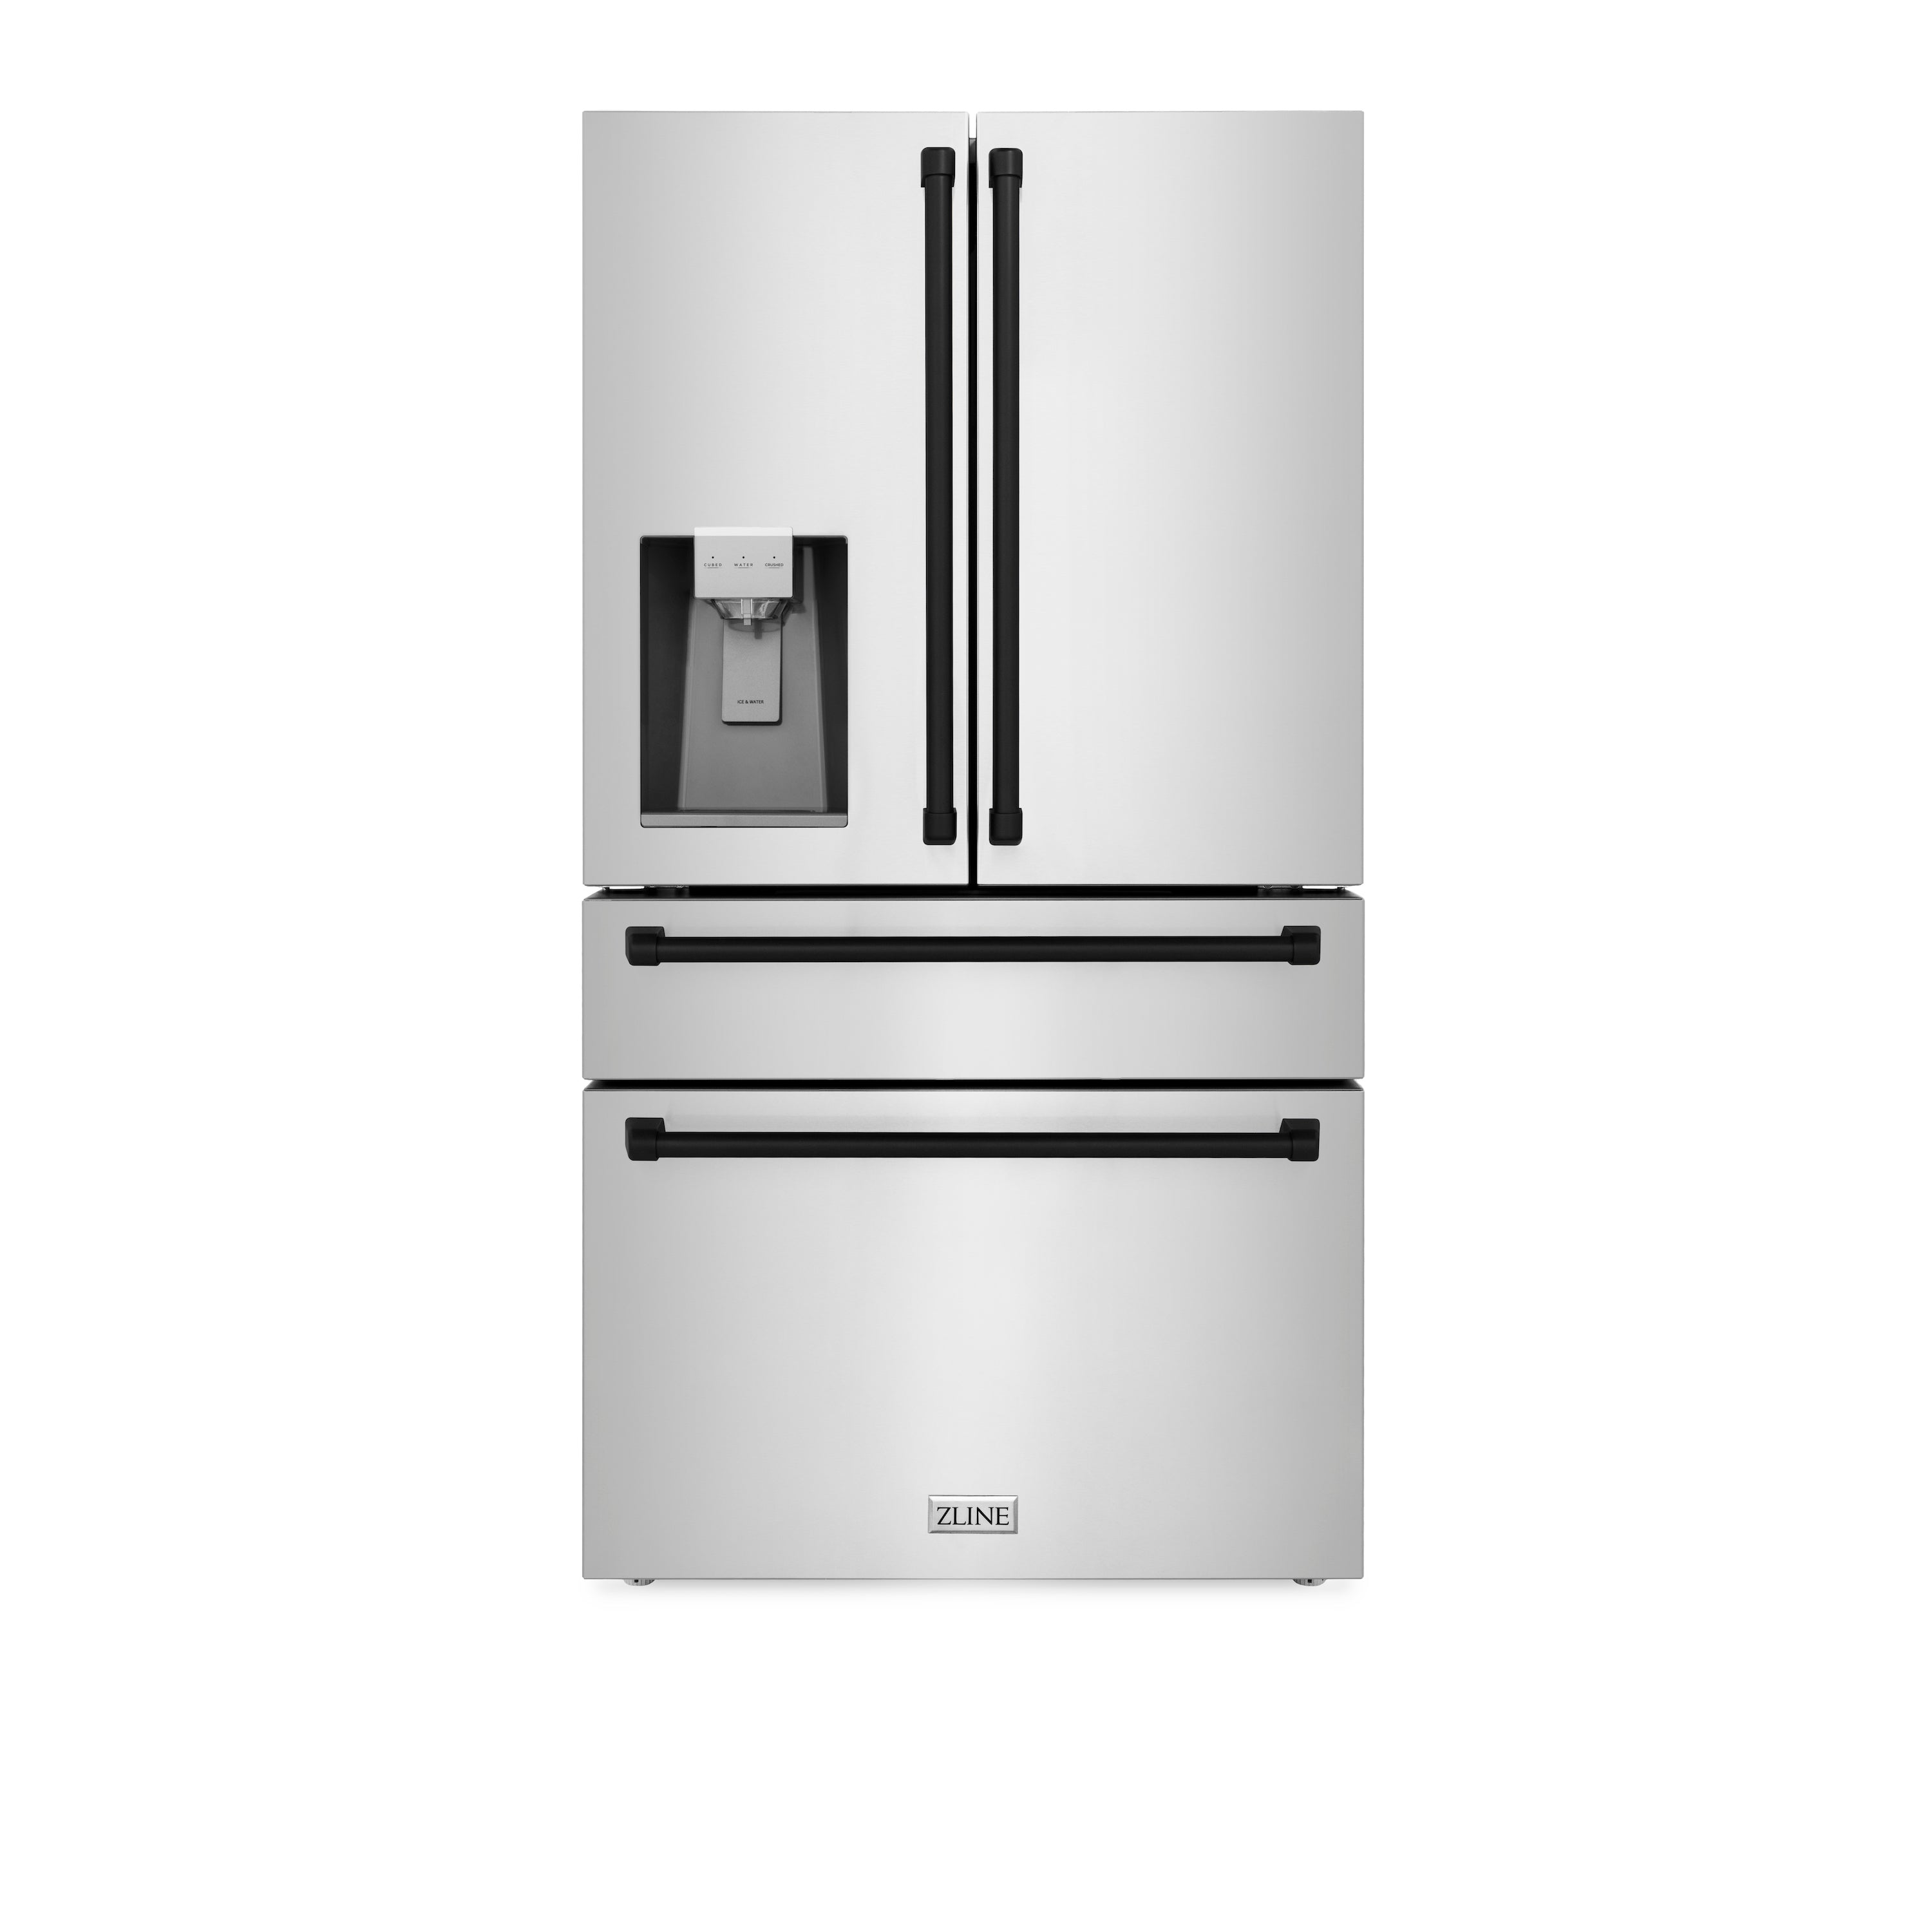 ZLINE 36" Autograph Edition 21.6 cu. ft 4-Door French Door Refrigerator with Water and Ice Dispenser in Fingerprint Resistant Stainless Steel with Matte Black Accents (RFMZ-W-36-MB)